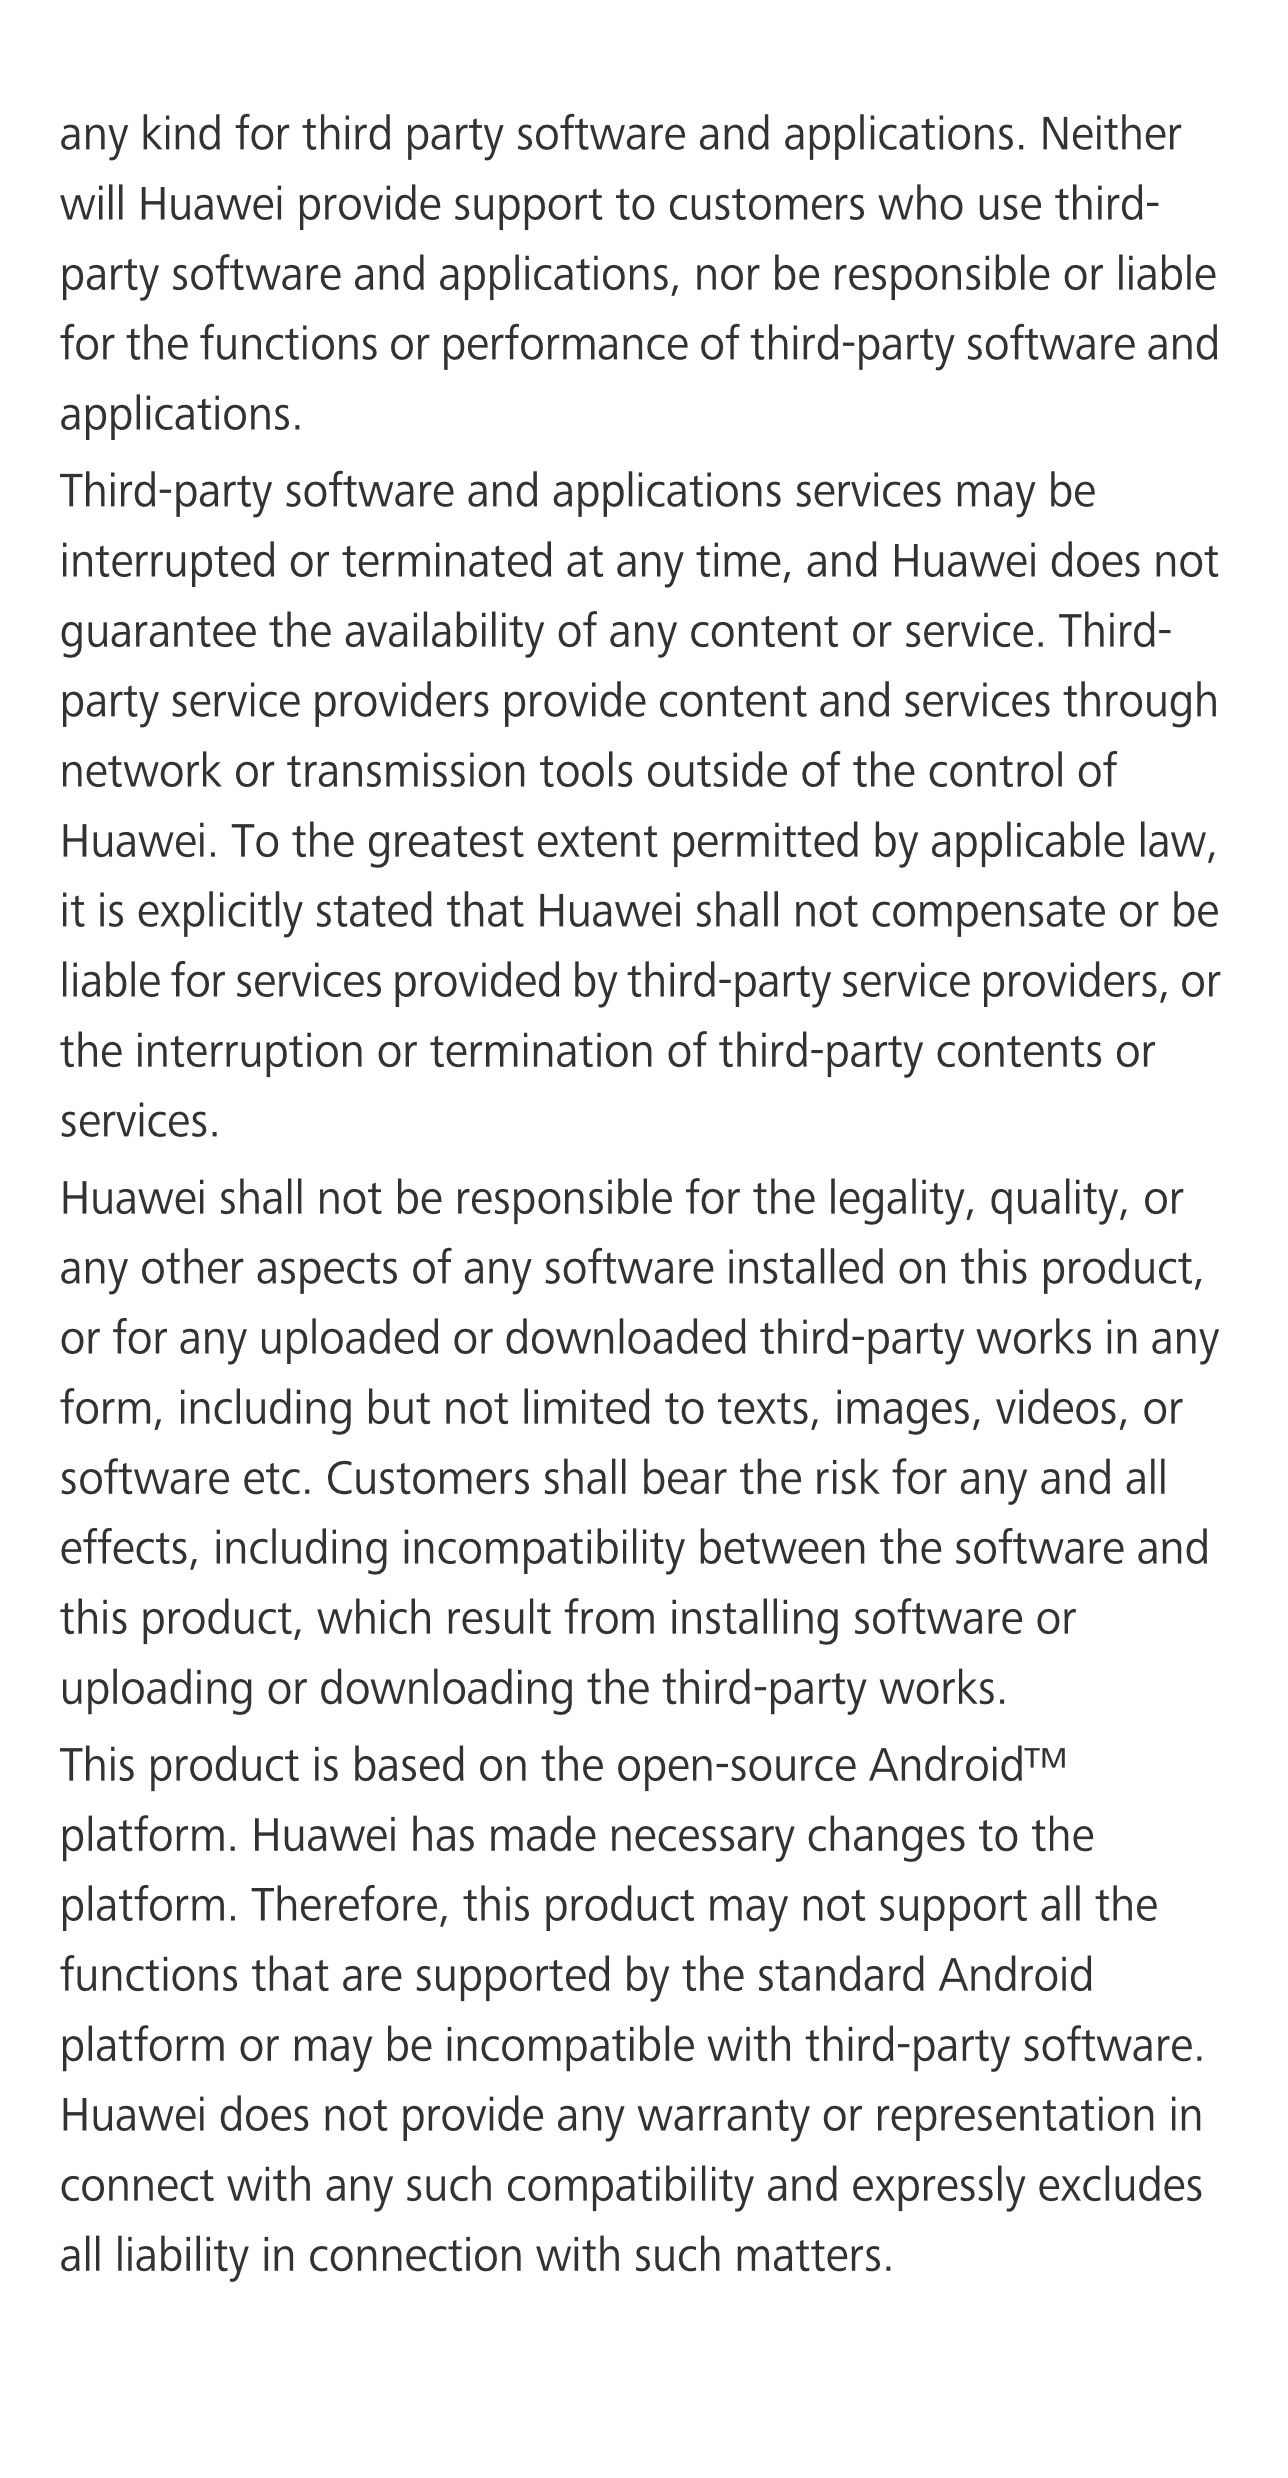 any kind for third party software and applications. Neither 
will Huawei provide support to customers who use third-
party softw